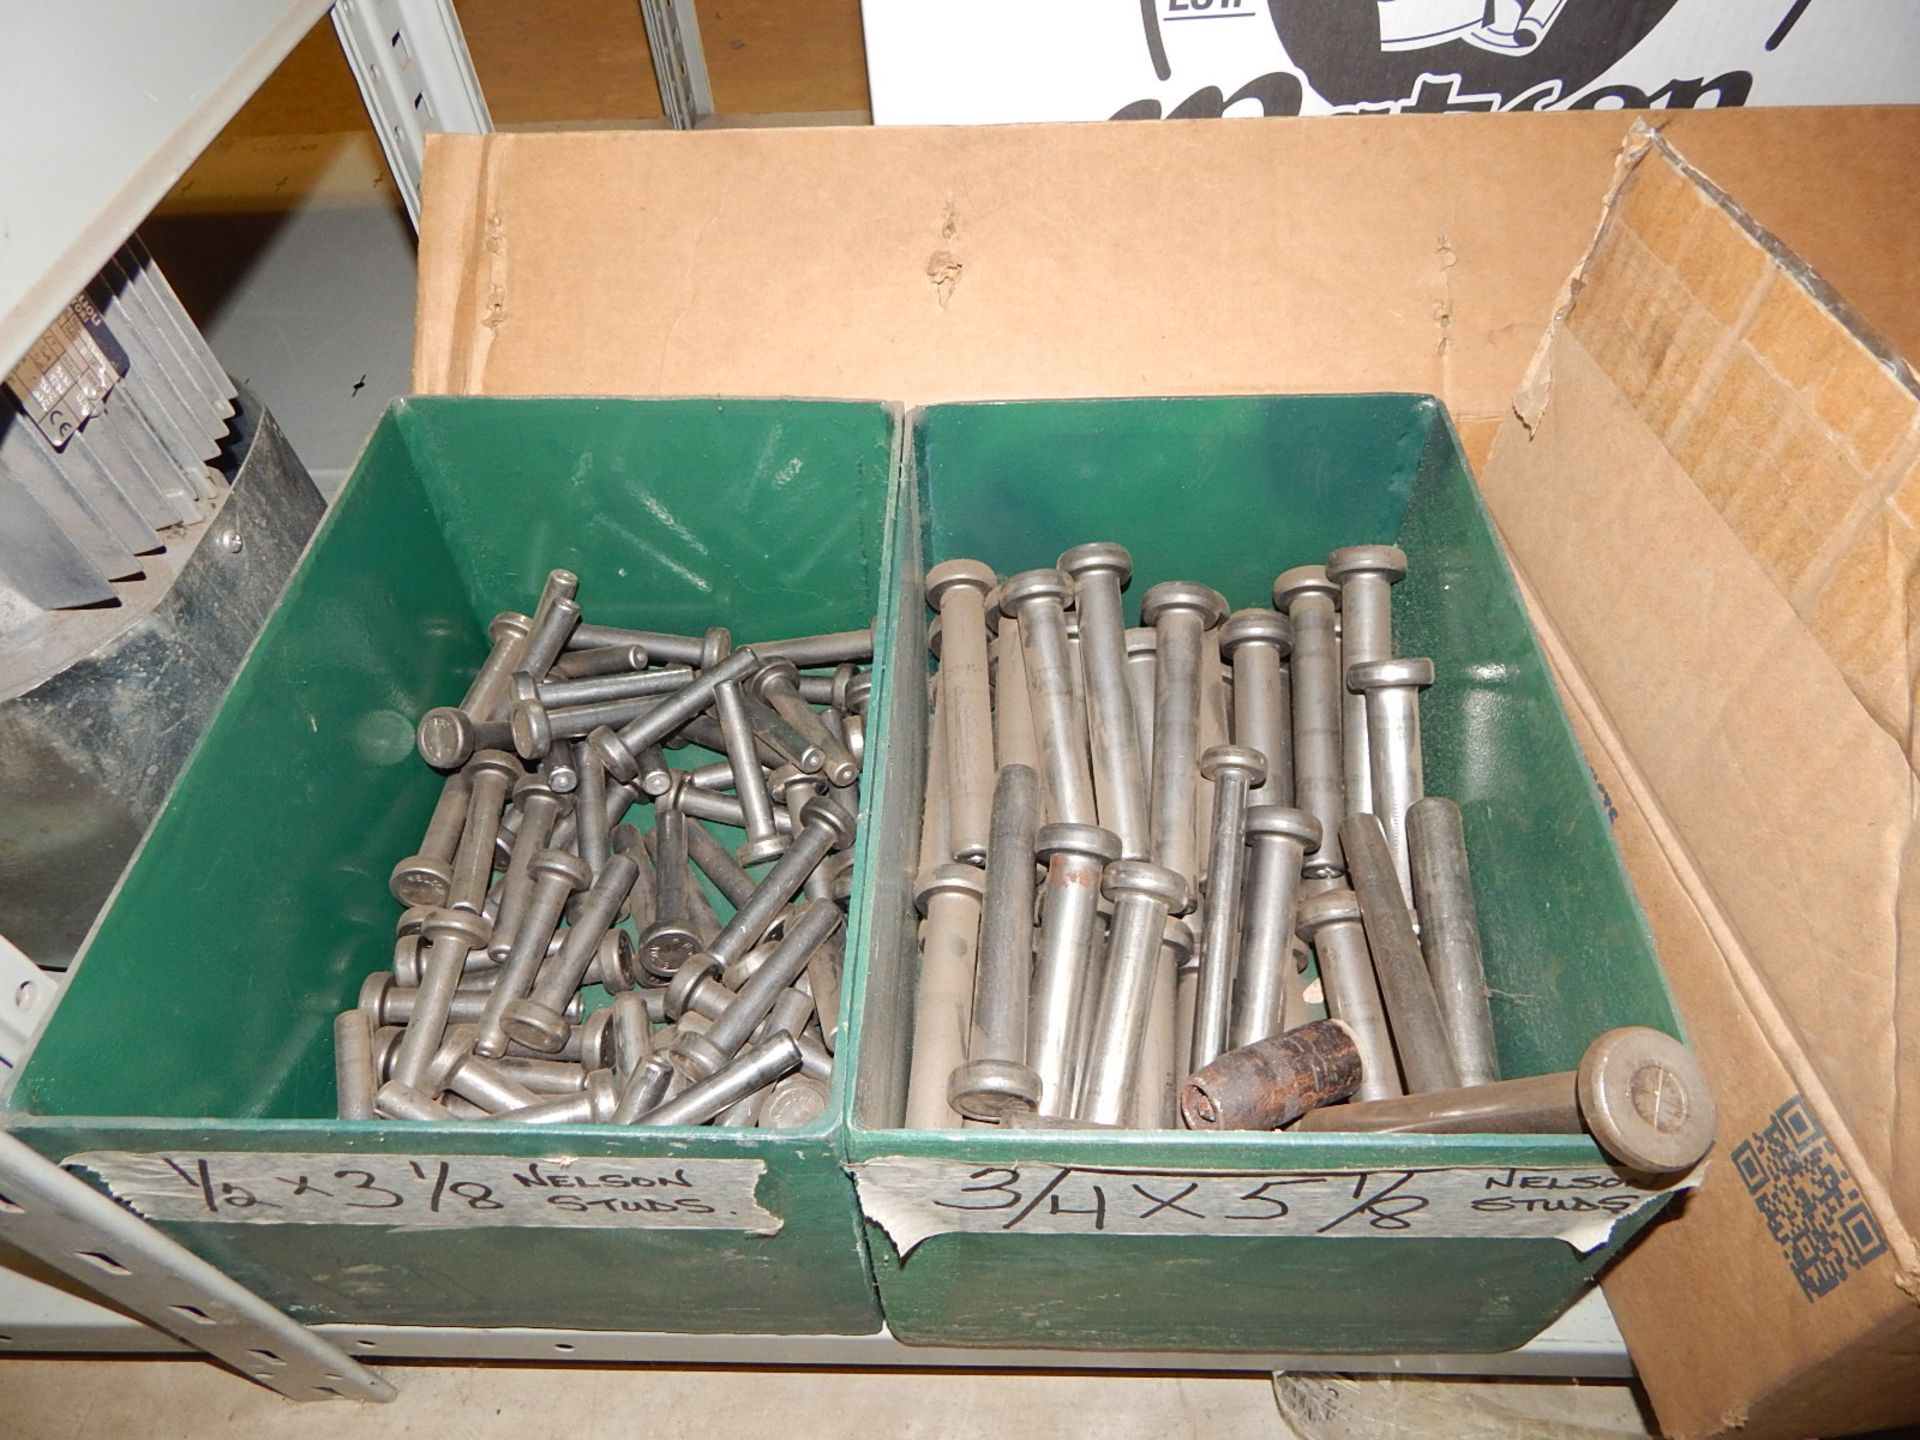 LOT/ CONTENTS OF SHELF CONSISTING OF WIRE, HARDWARE, AND MAINTENANCE SUPPLIES - Image 8 of 10